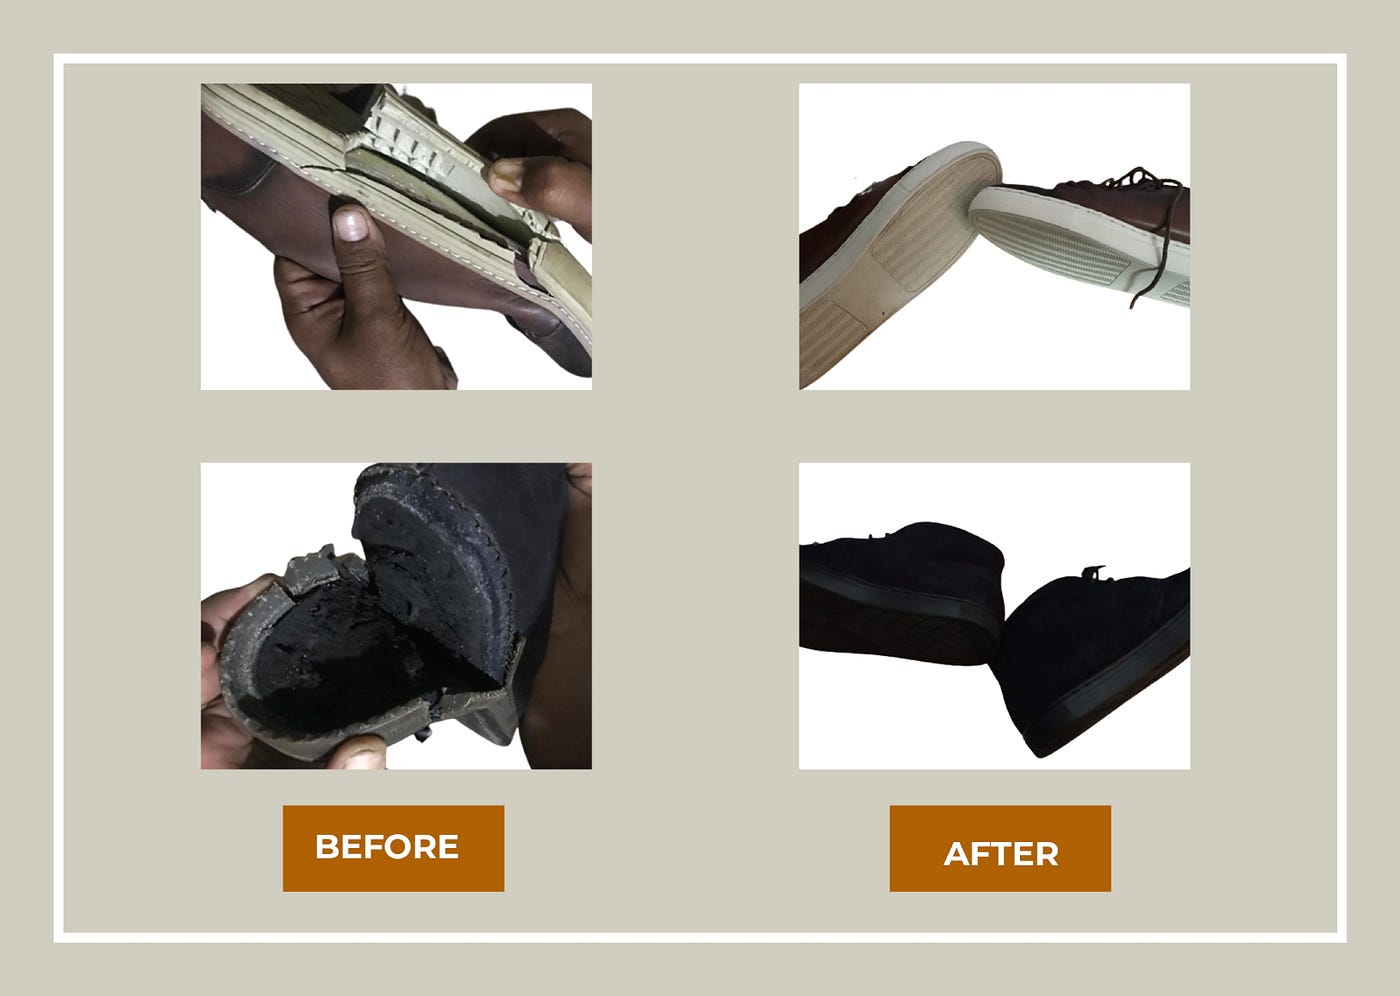 The Best In Class Repair Service For Premium Bags, by Leatherdryclean